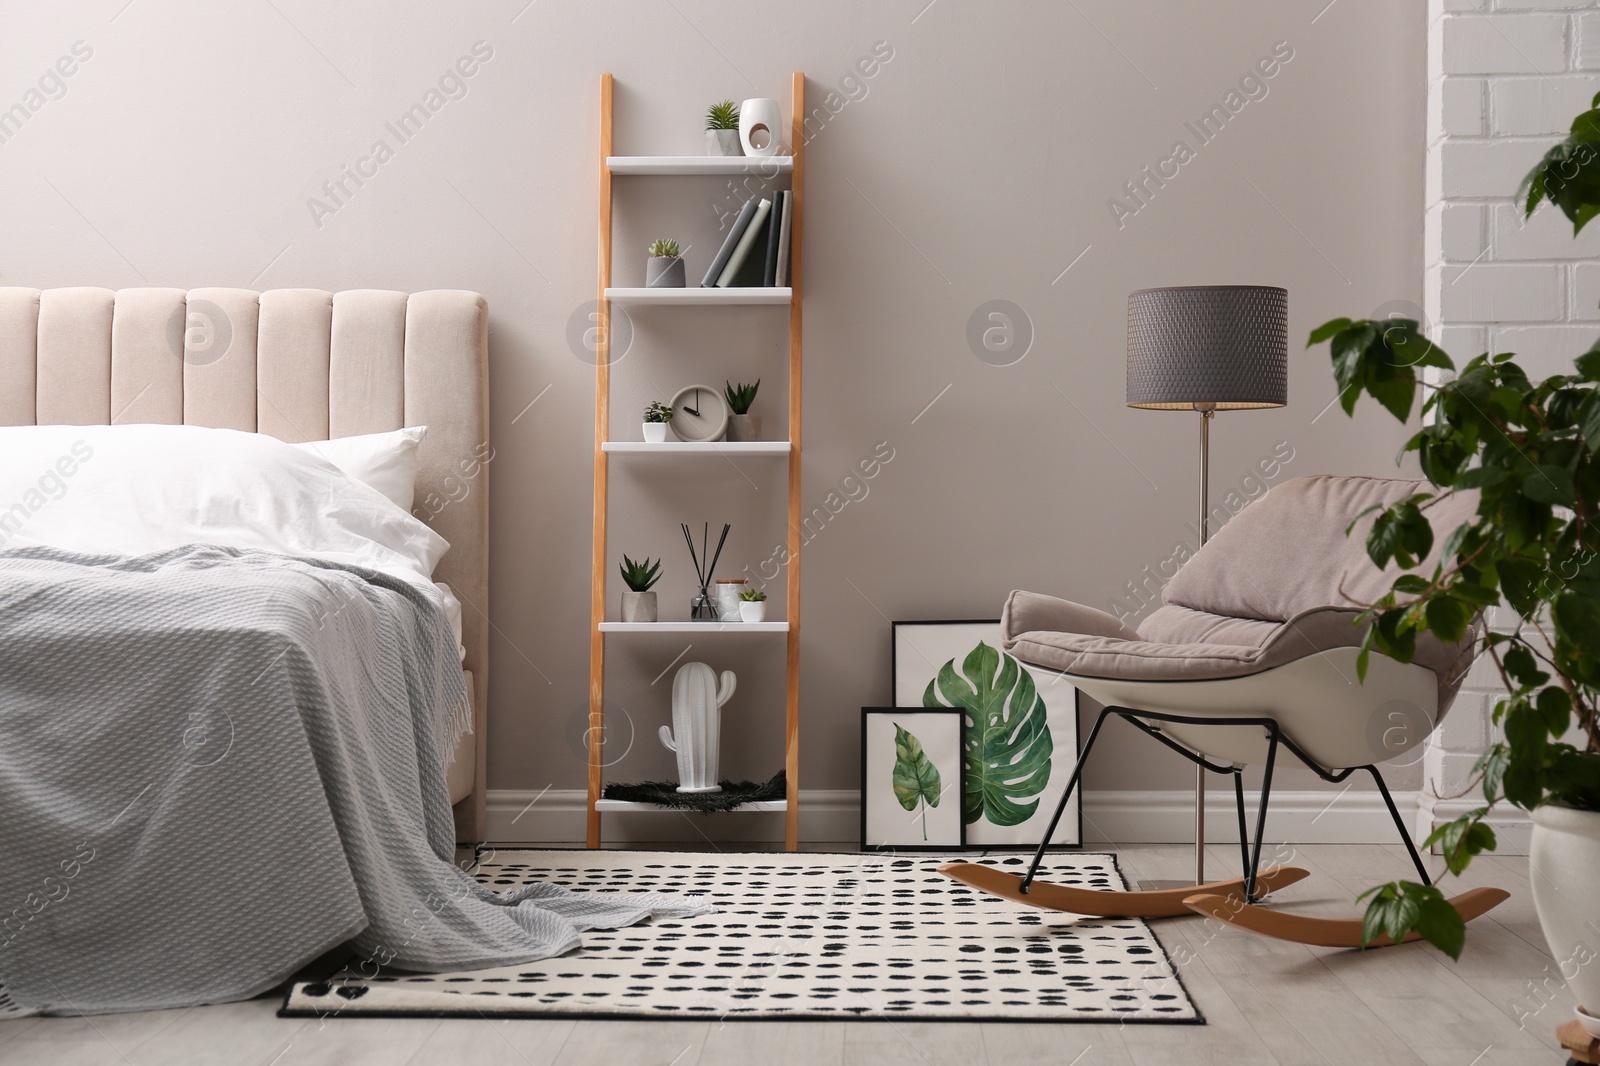 Photo of Stylish bedroom interior with decorative ladder and rocking chair